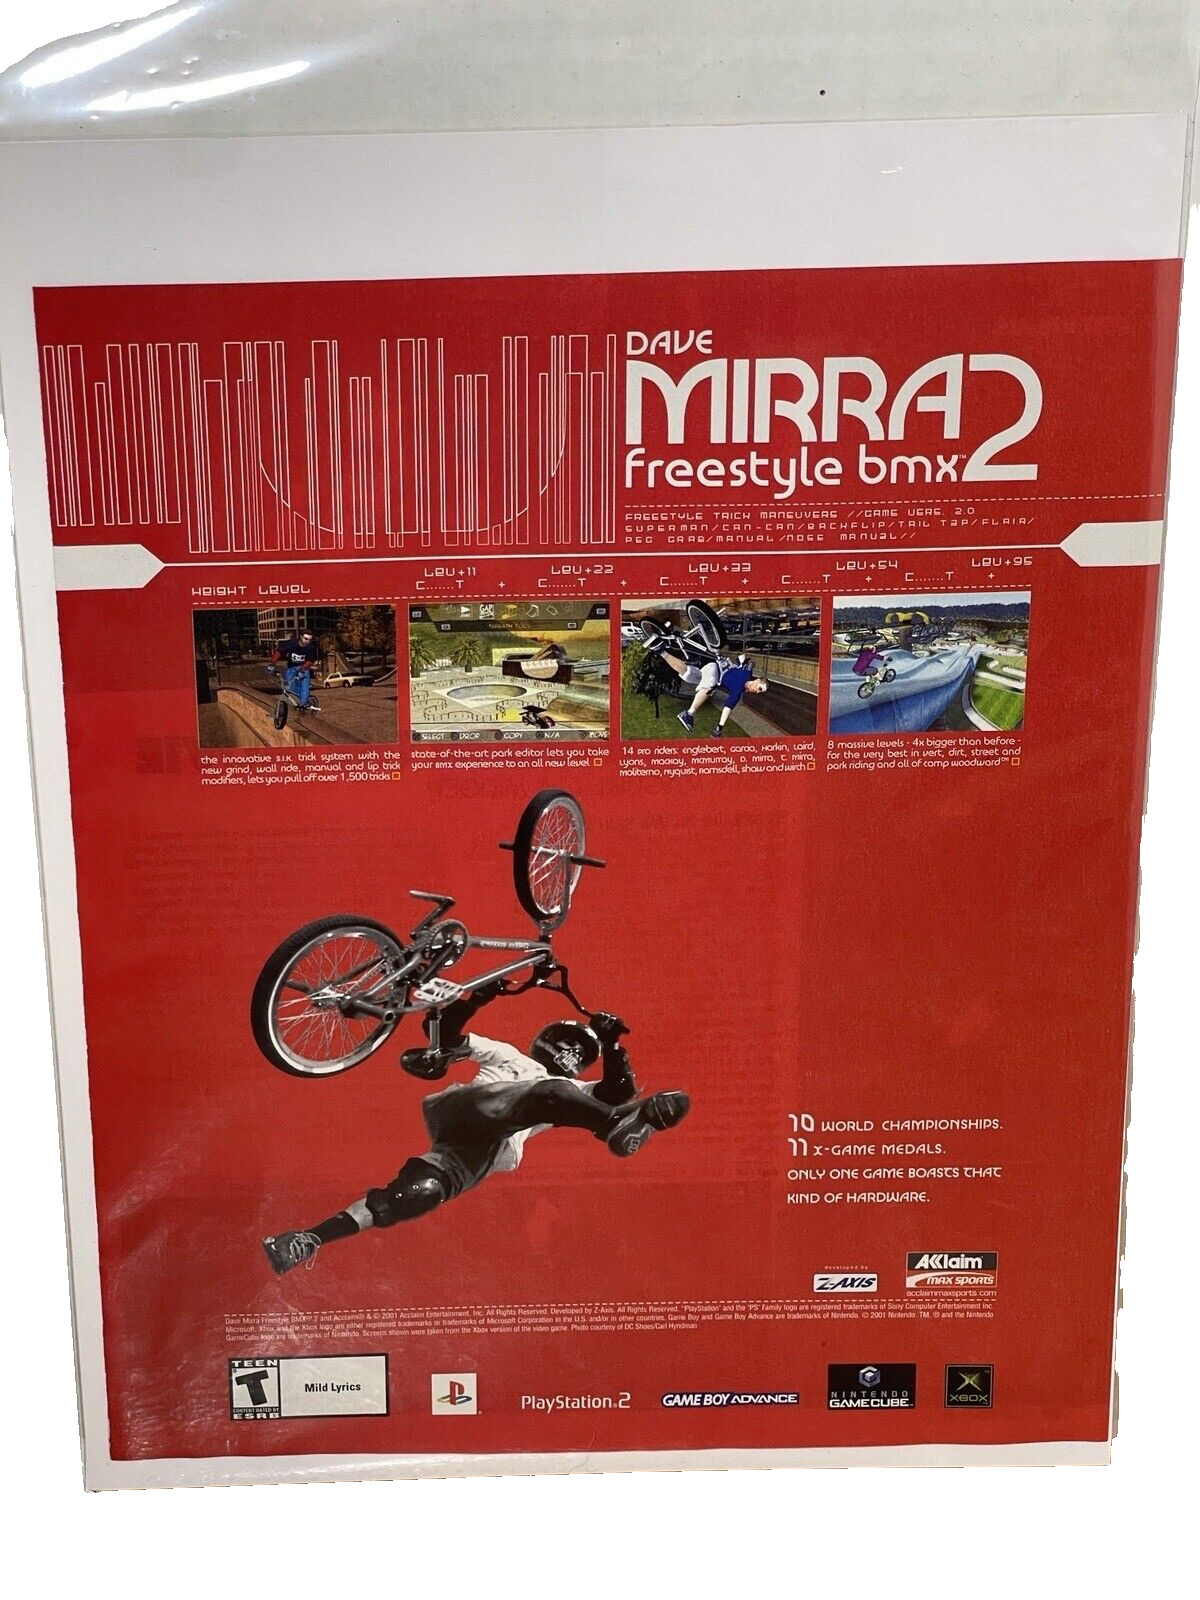 Dave Mirra Freestyle BMX 2 Playstaion 2 PS2 Xbox GC 2001 Print Ad Art 